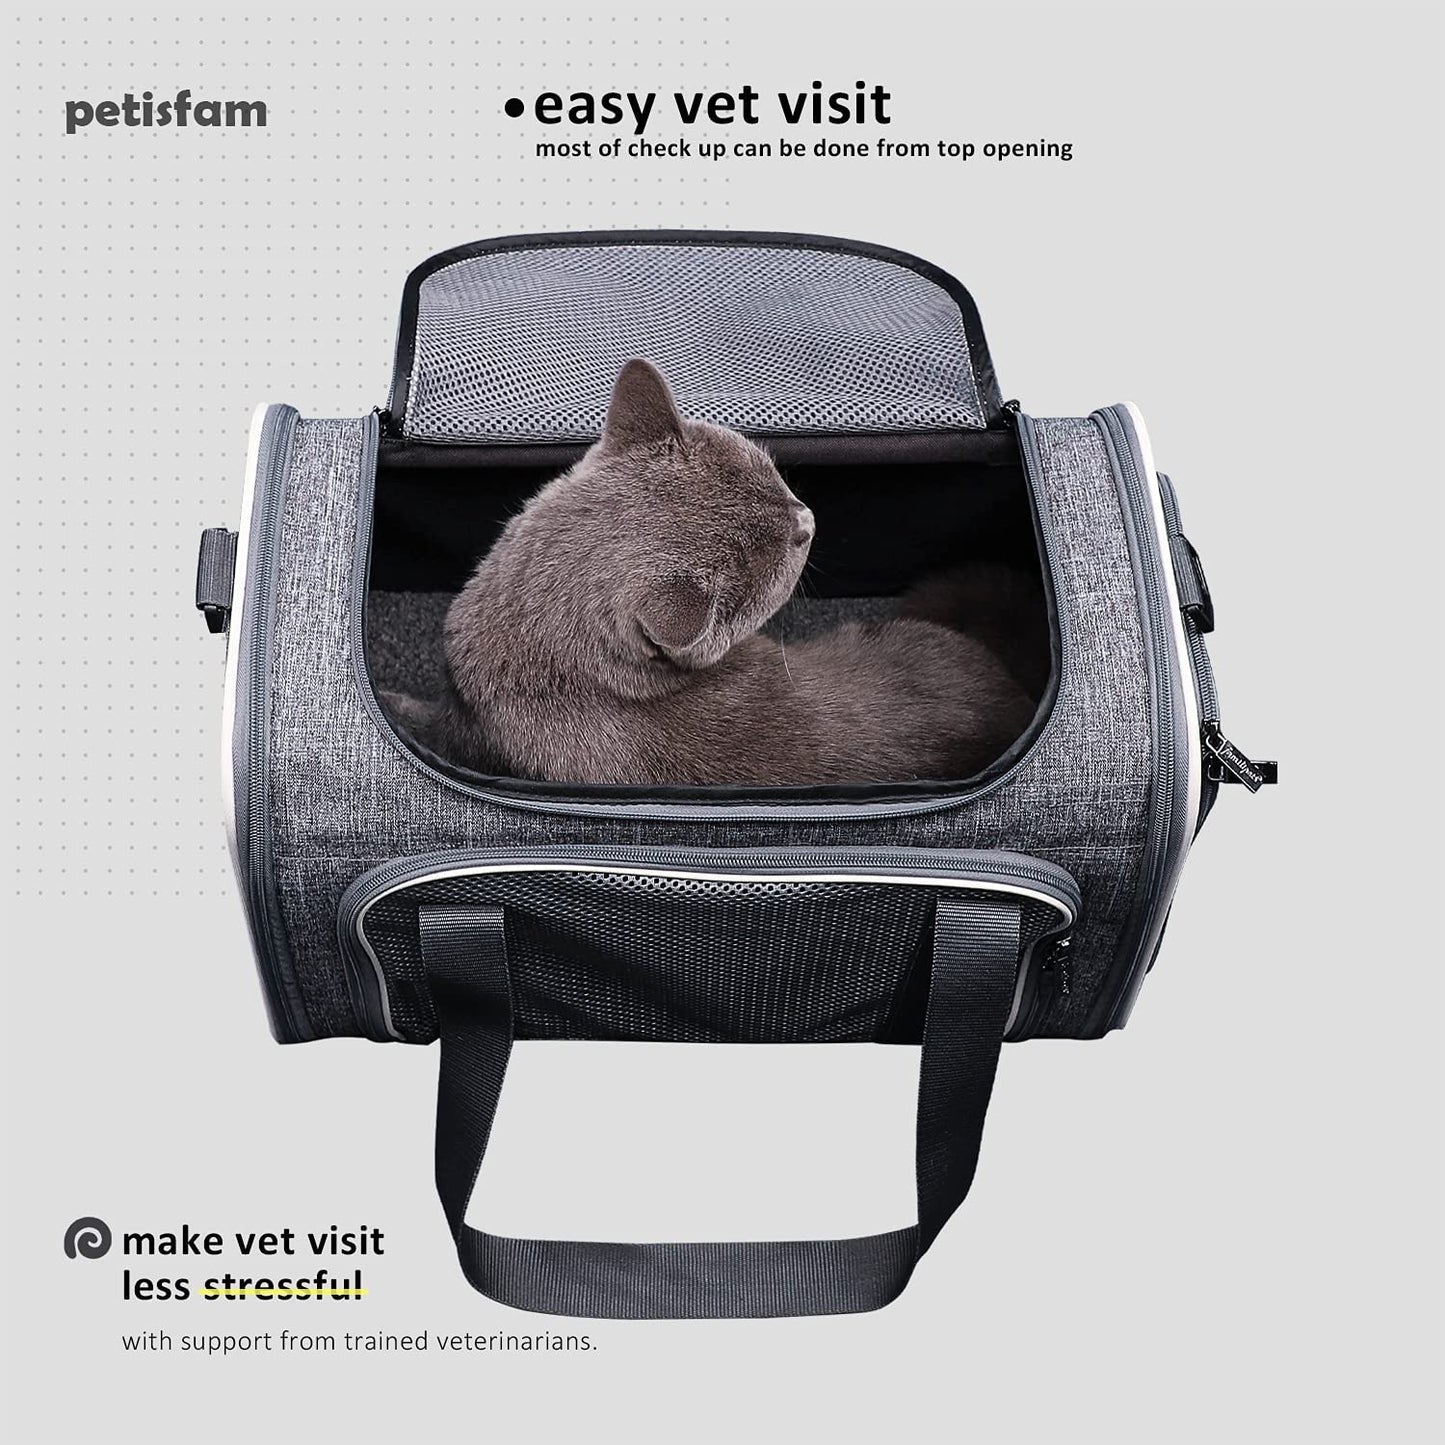 Top Load Cat Carrier Bag for Medium Cats and Small Dogs. Airline Approved, Collapsible, Escape Proof and Auto-Safe. Easy to Get Cat in and Make Vet Visit Less Stressful